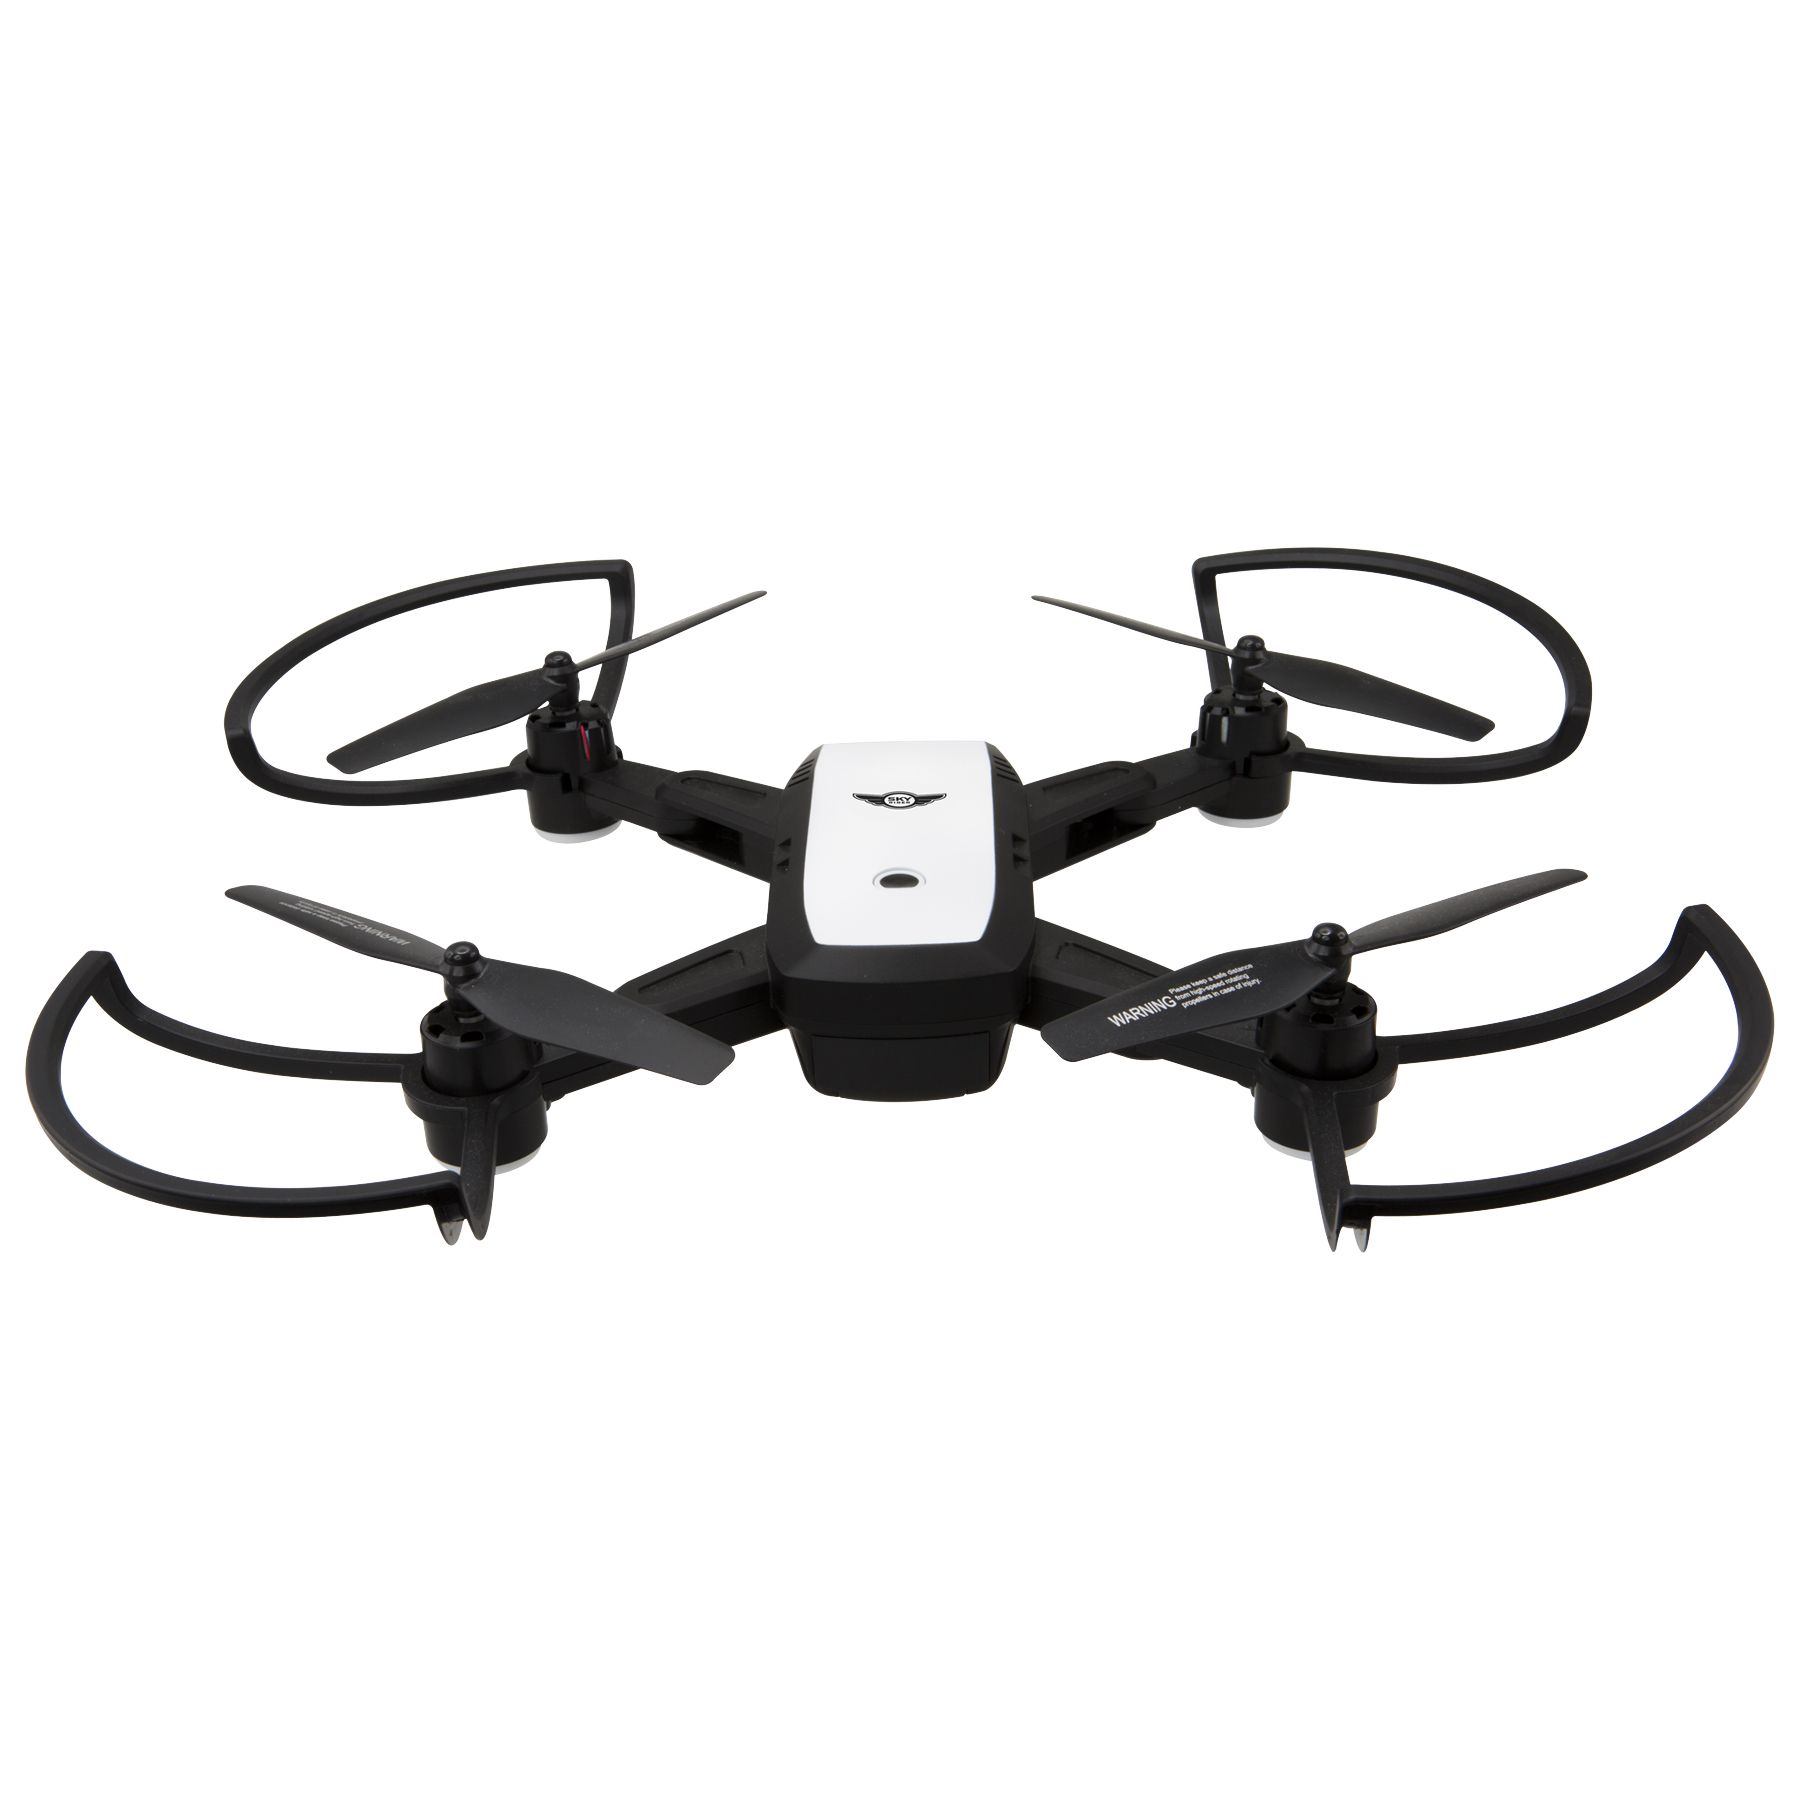 SkyRider Raven 2 Foldable Drone with GPS & Wi-Fi Camera